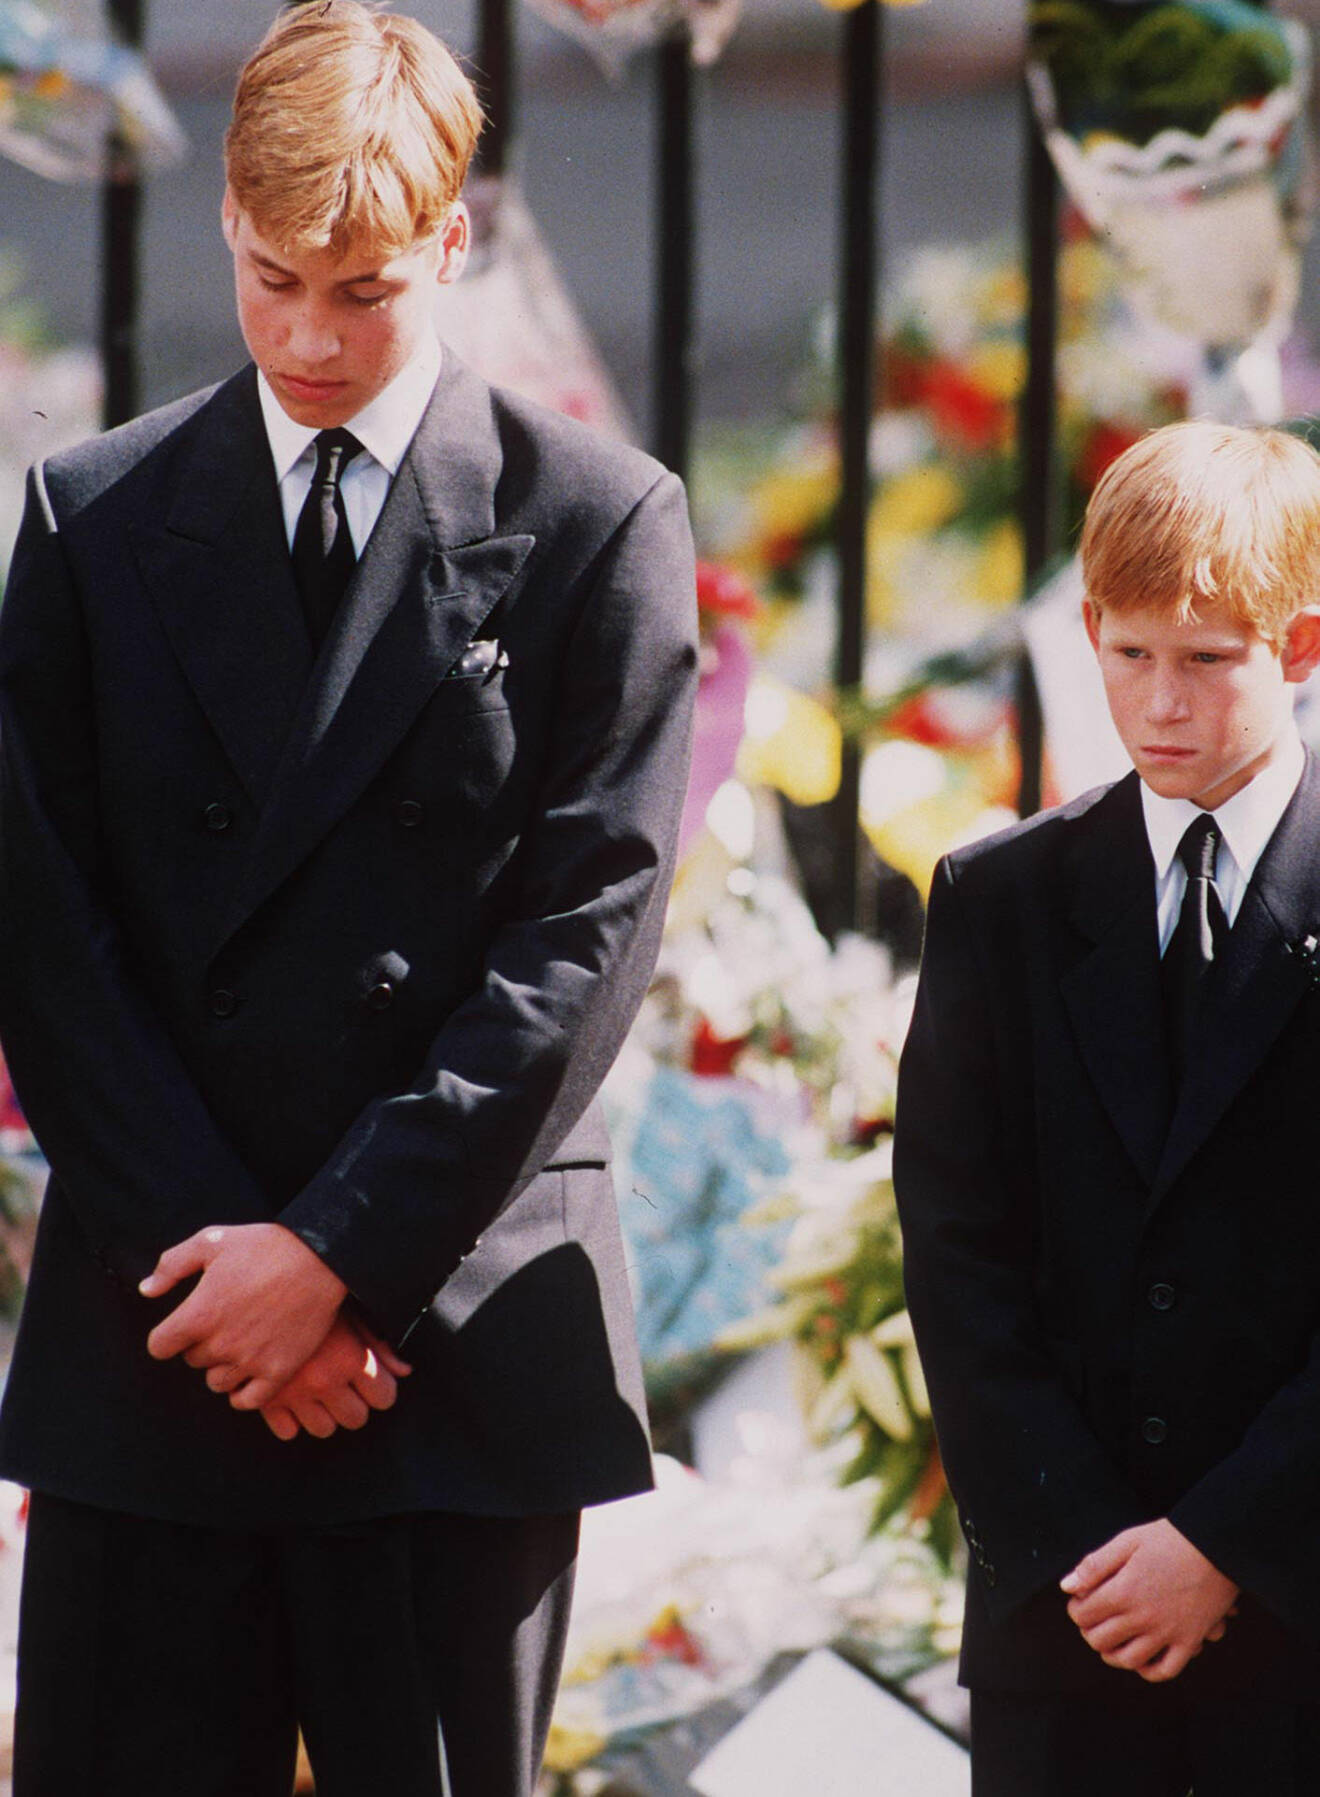 FUNERAL OF DIANA, PRINCESS OF WALES Left: HRH PRINCE WILLIAM, with his brother HRH PRINCE HARRY, outside Westminster Abbey after the funeral service of their mother Diana, Princess of Wales. Universal Pictorial Press Photo UE 013690/U 06.09.1997 (c) DPA / IBL Bildbyrå